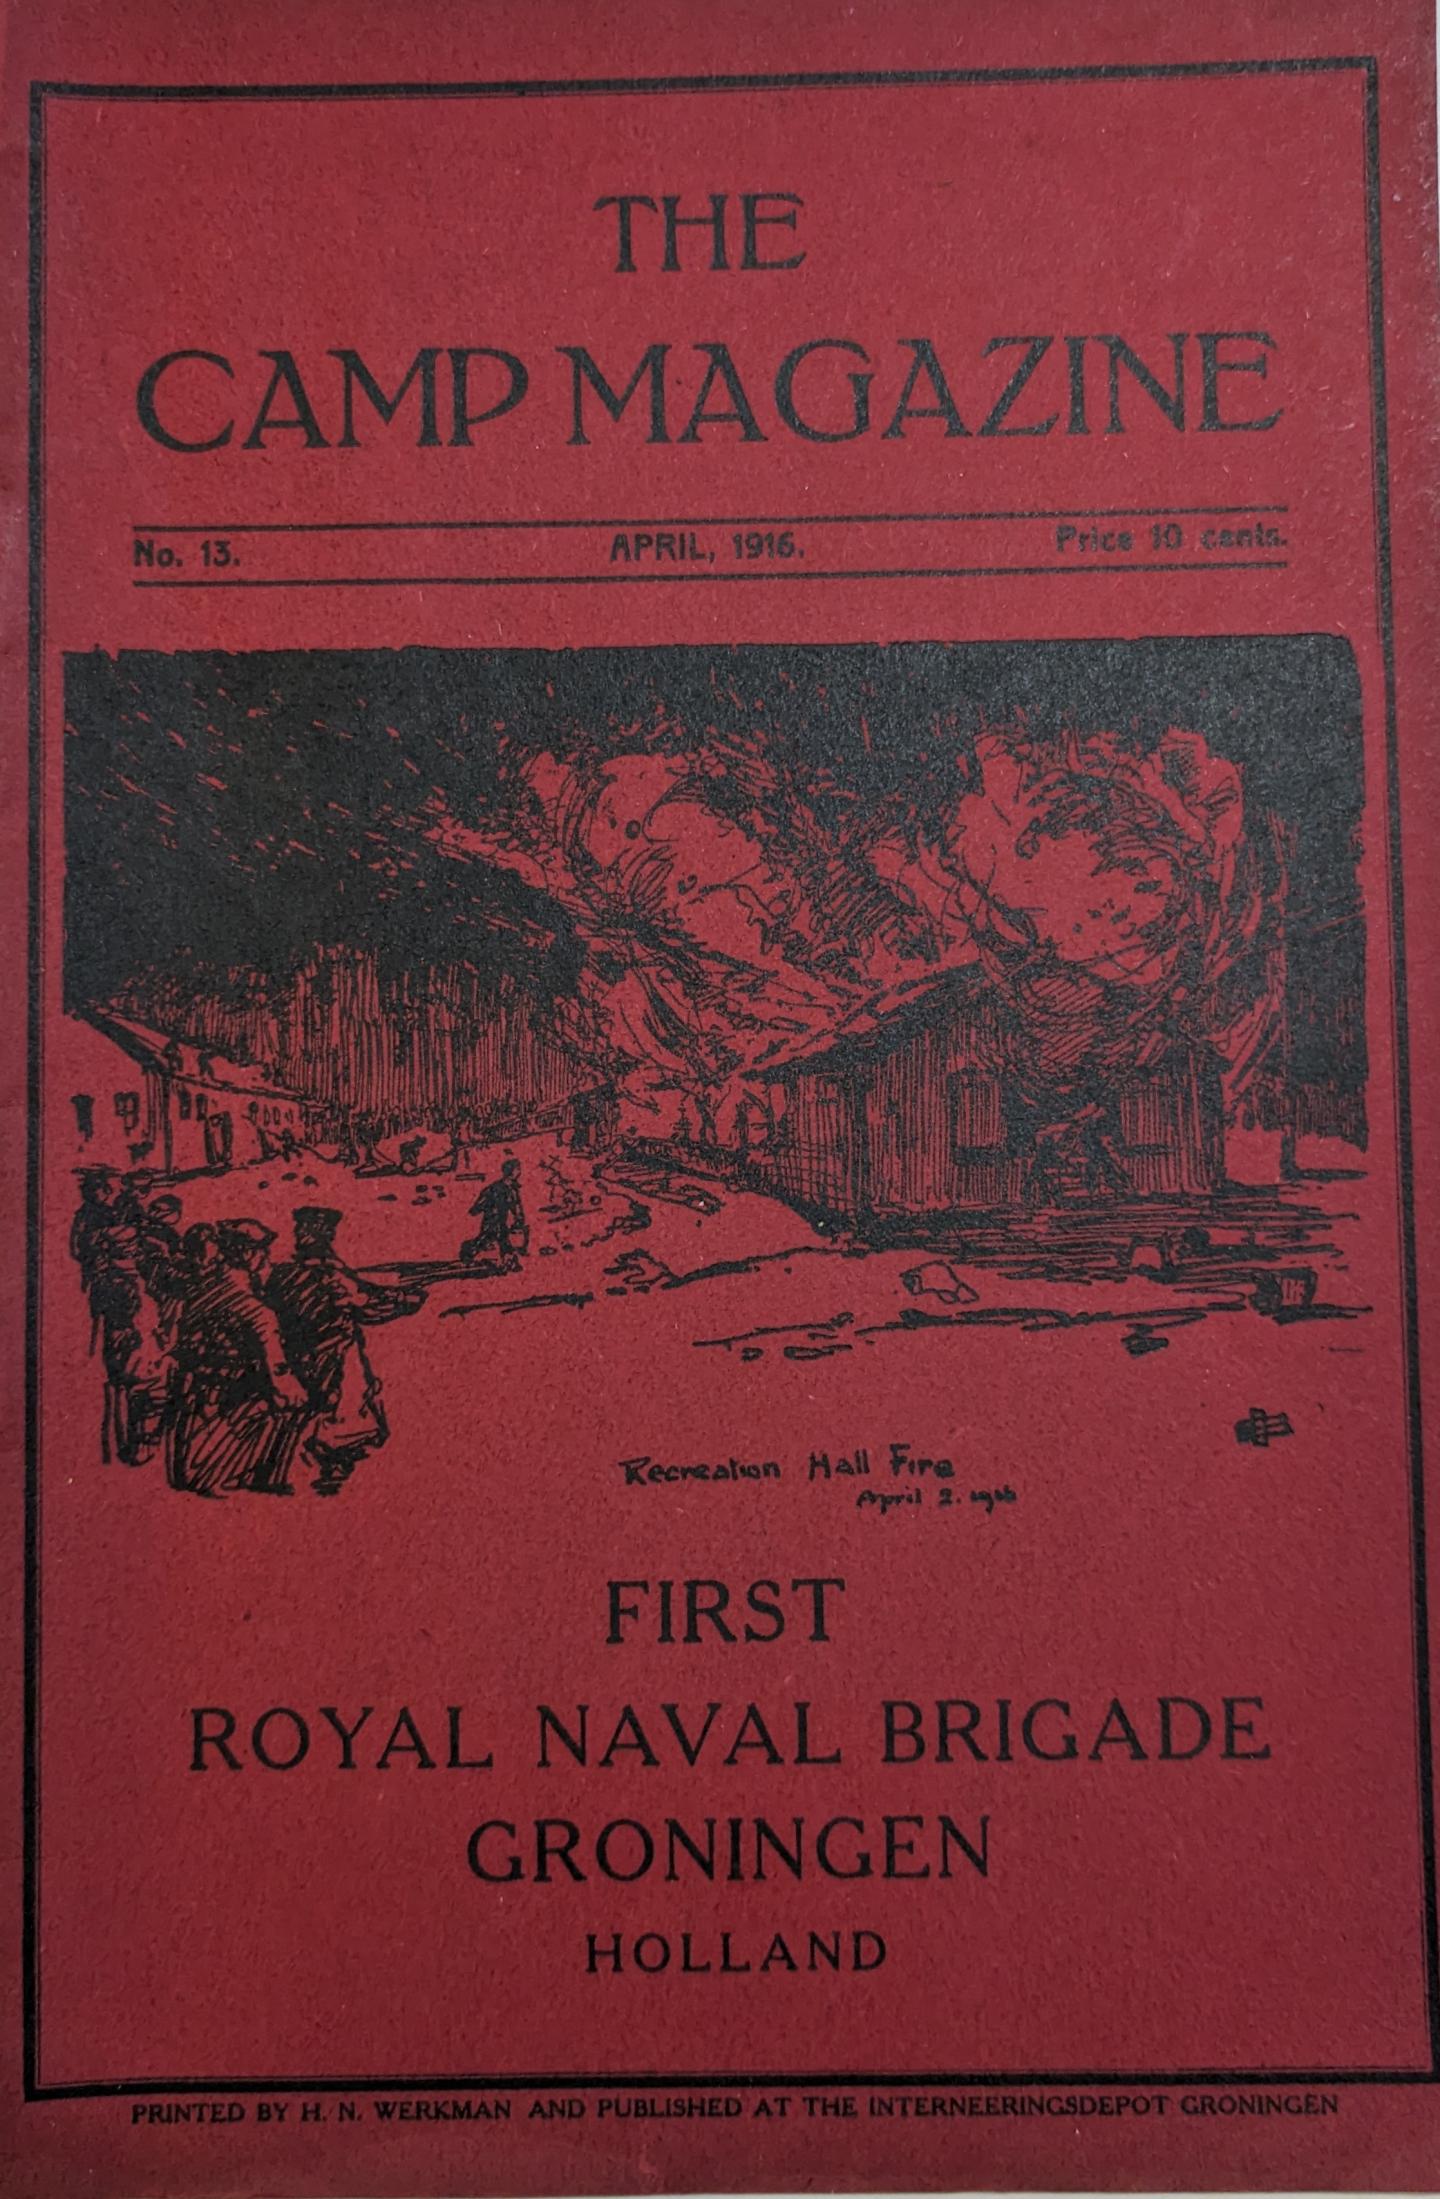 Cover of issue number 13 of Camp Magazine from April 1916. It is red with an illustration of the burning of the recreational hut within the camp.